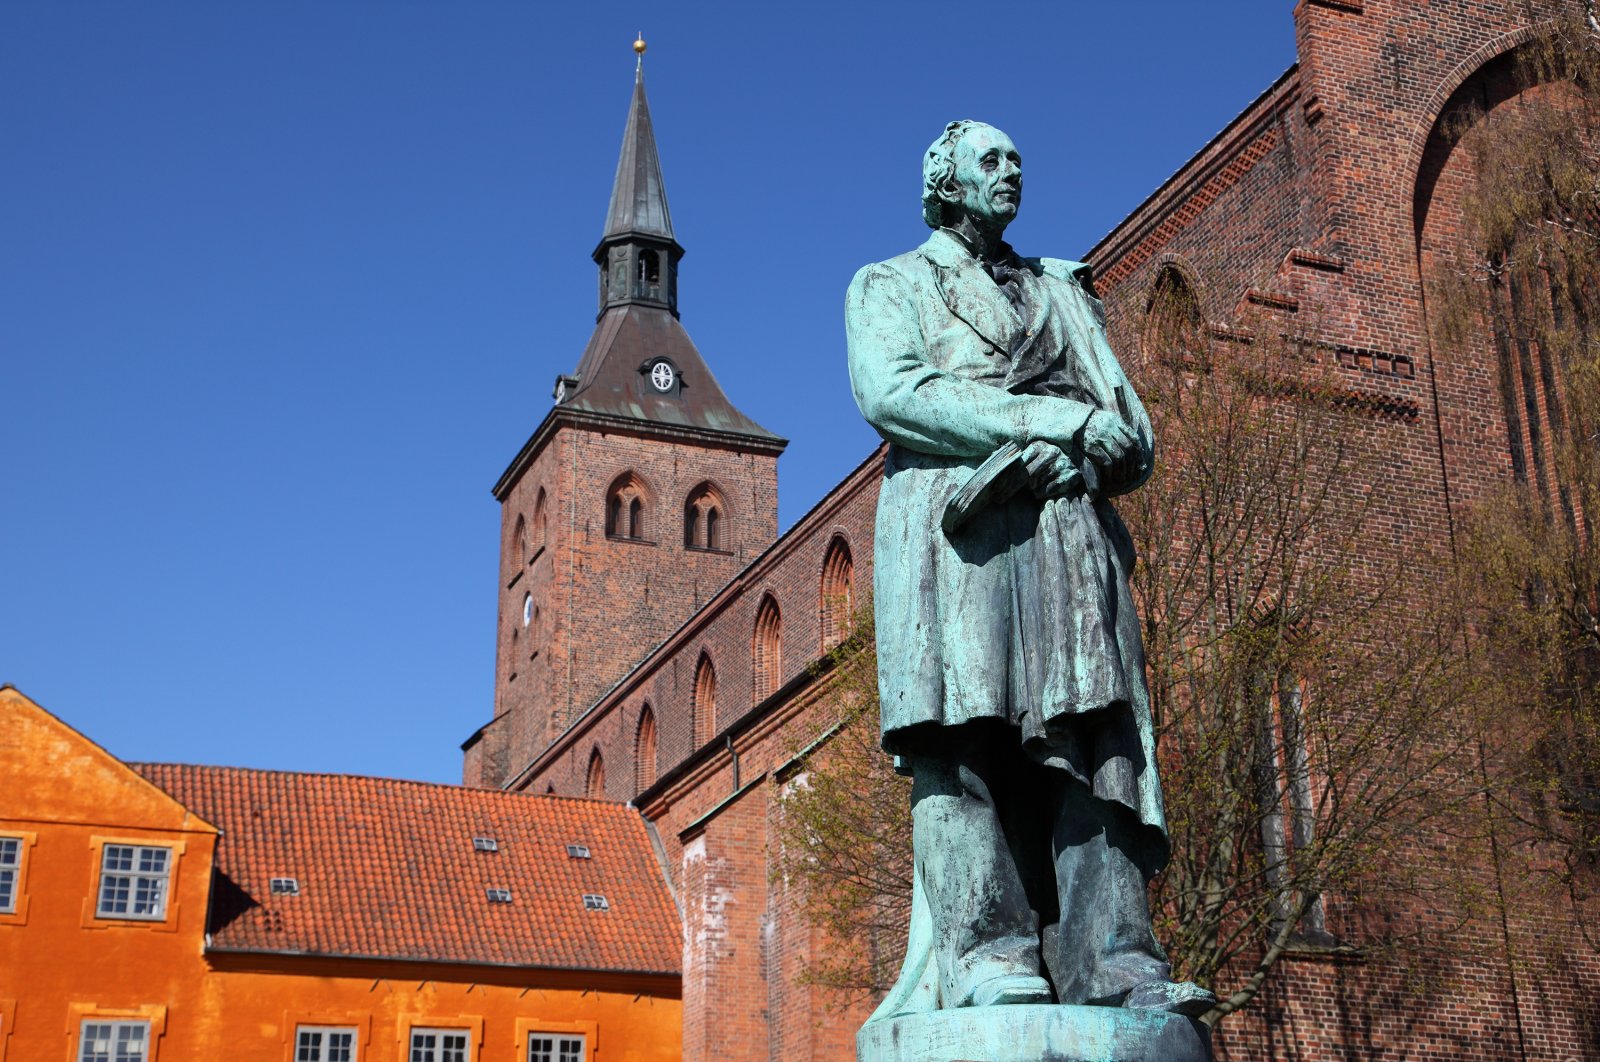 Sculpture of world famous Danish fairy tale writer and poet Hans Christian Andersen in front of the Sankt Knuds church in his hometown of Odense, Denmark. (Getty Images)